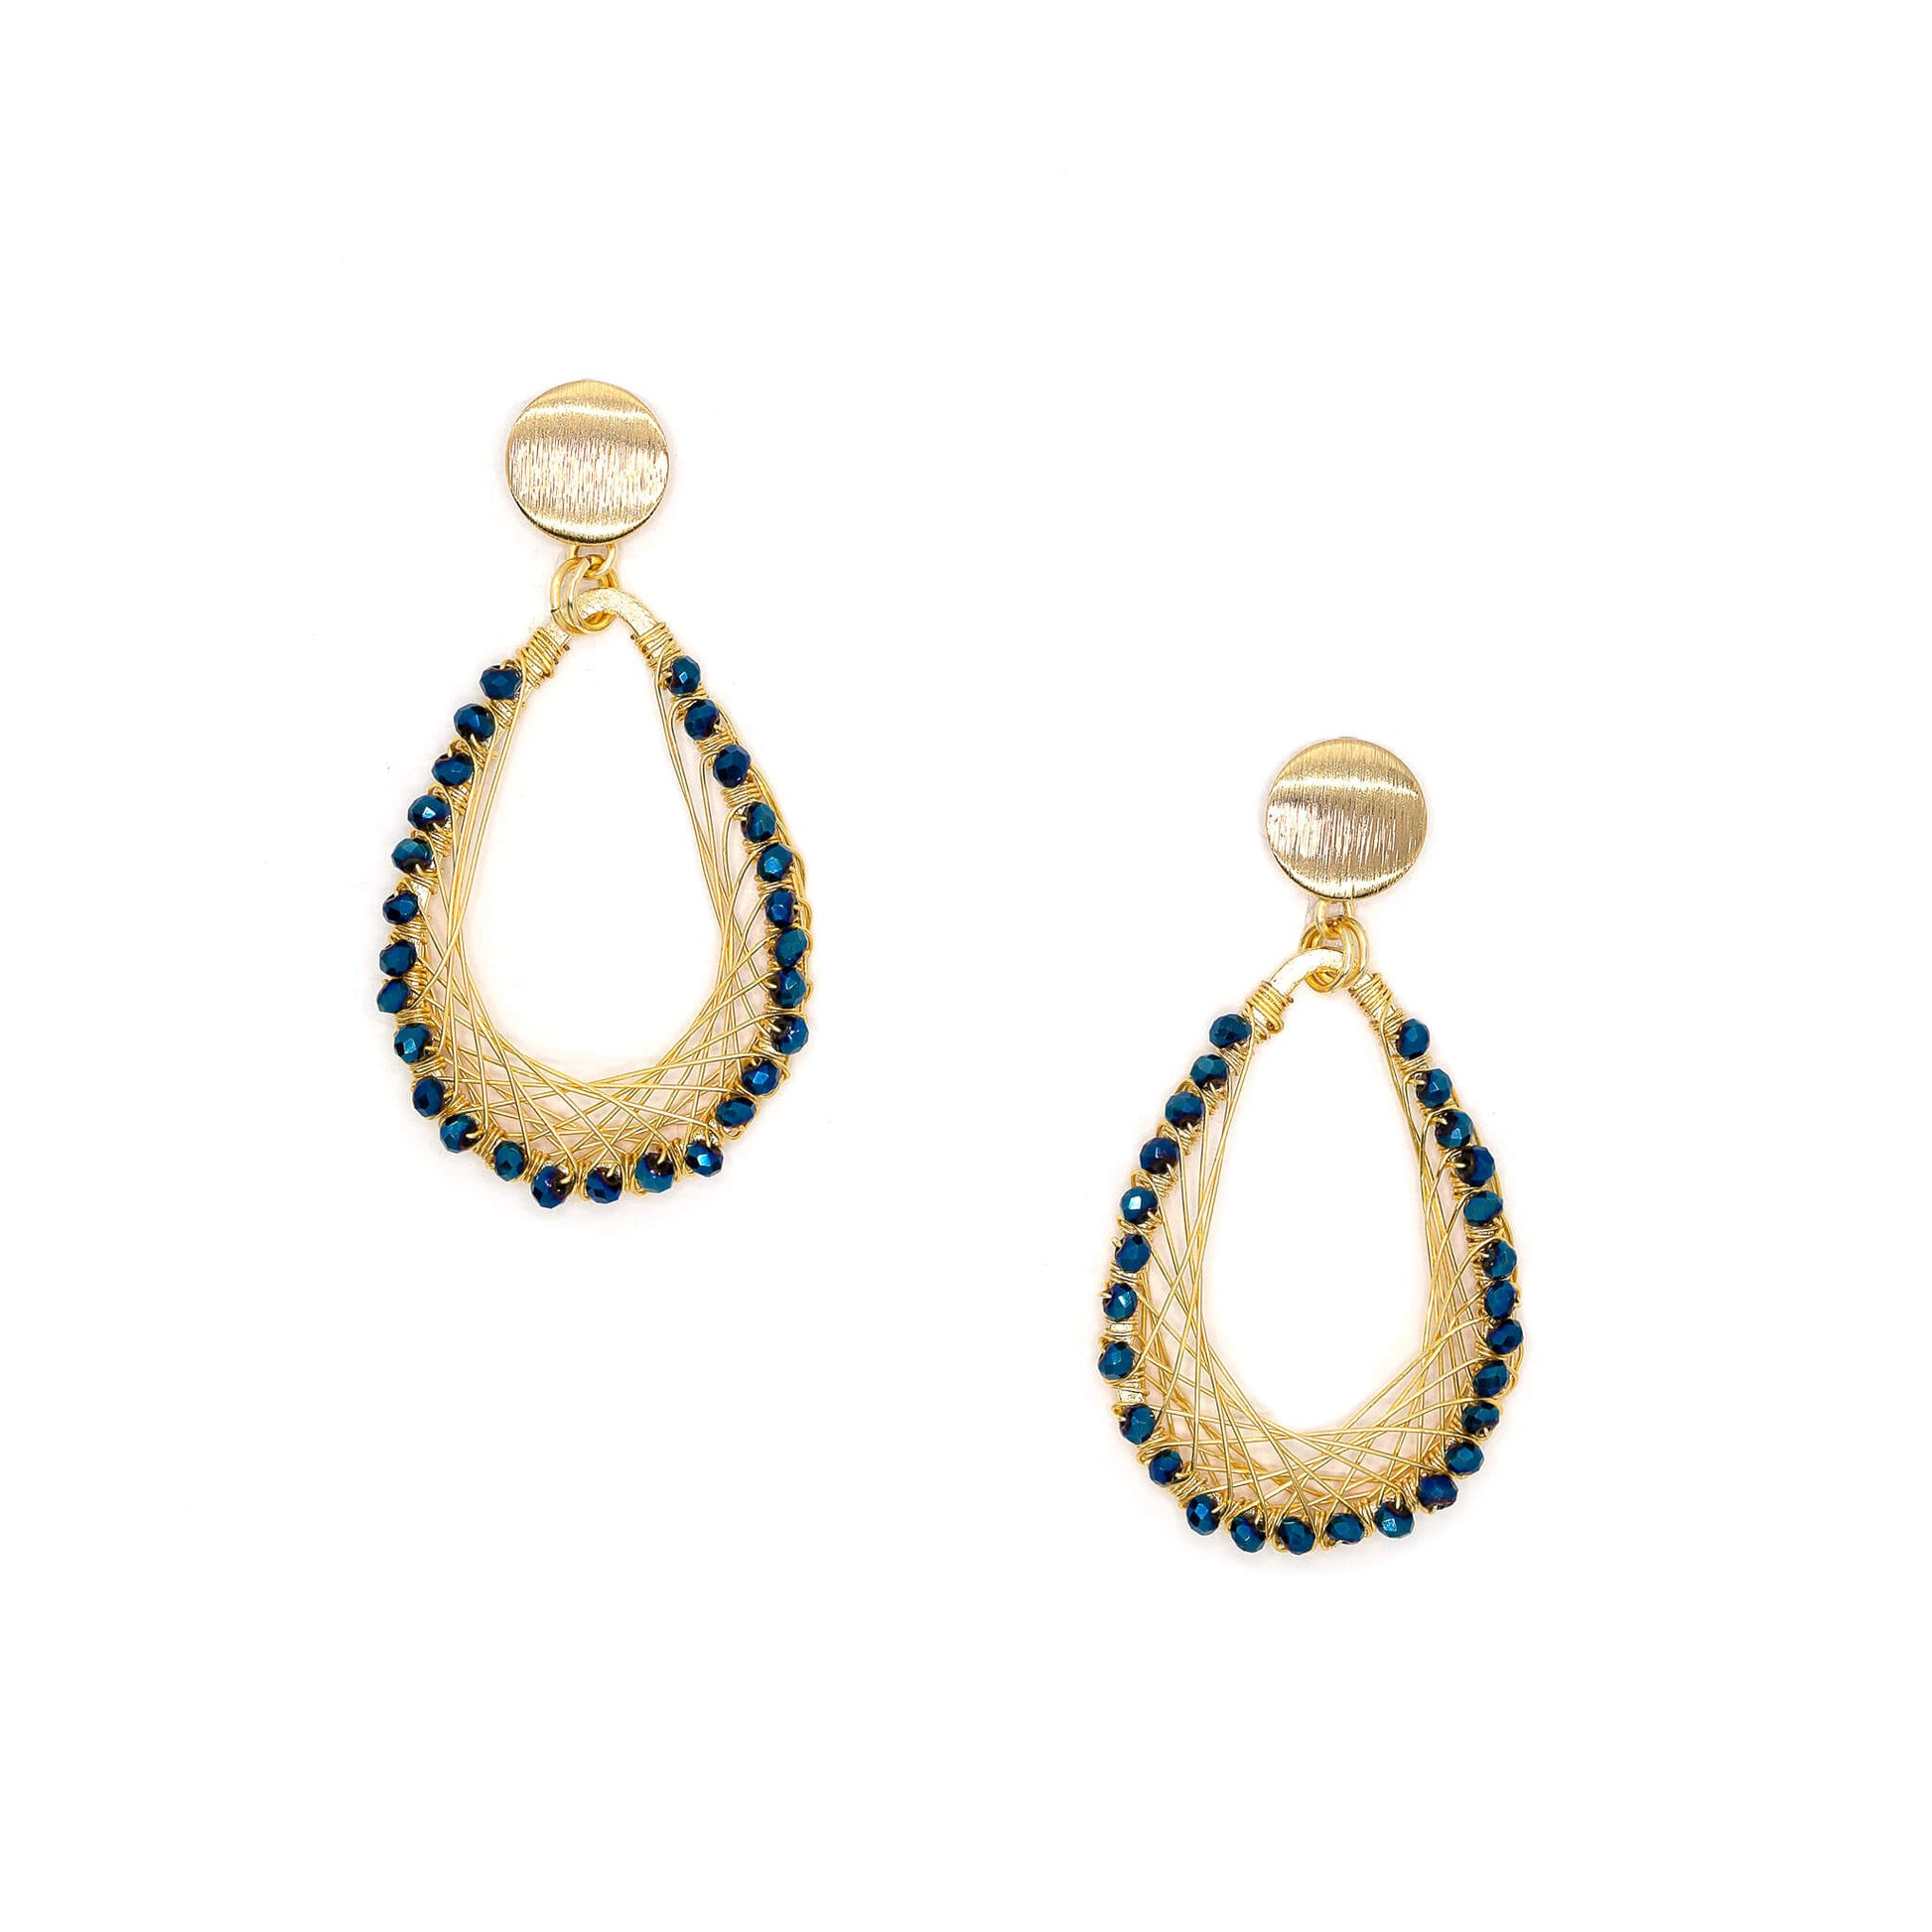 Barsha  Earrings are 2.5 inches long. Gold and Metallic Blue earrings. Beaded Teardrop Earrings. Handmade with non-tarnish wire, Crystal Beads, and a metal frame. Dangle Wire Earrings.